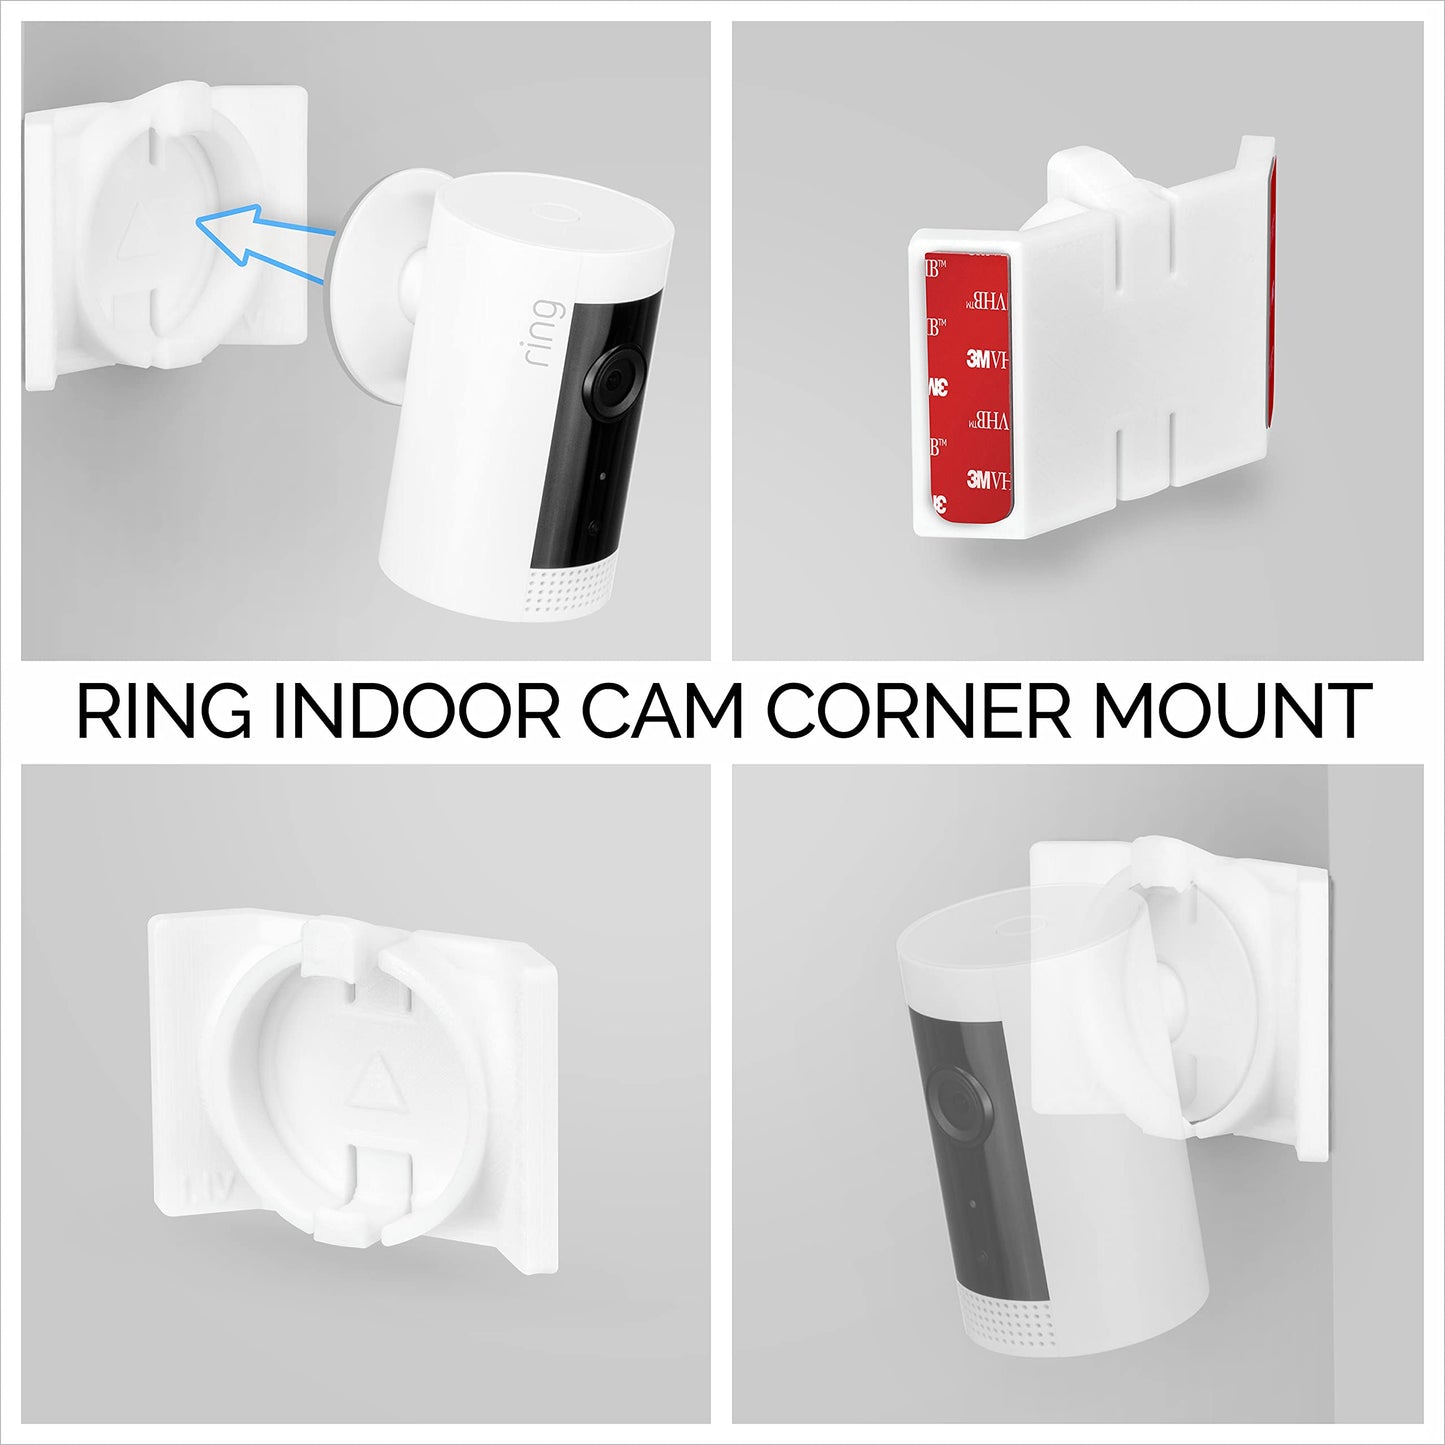 BrainWavz Screwless Corner Mount for Ring Indoor Cam - VHB Stick On - Easy Install, No Drill, No Tools Needed, Strong Adhesive (White)